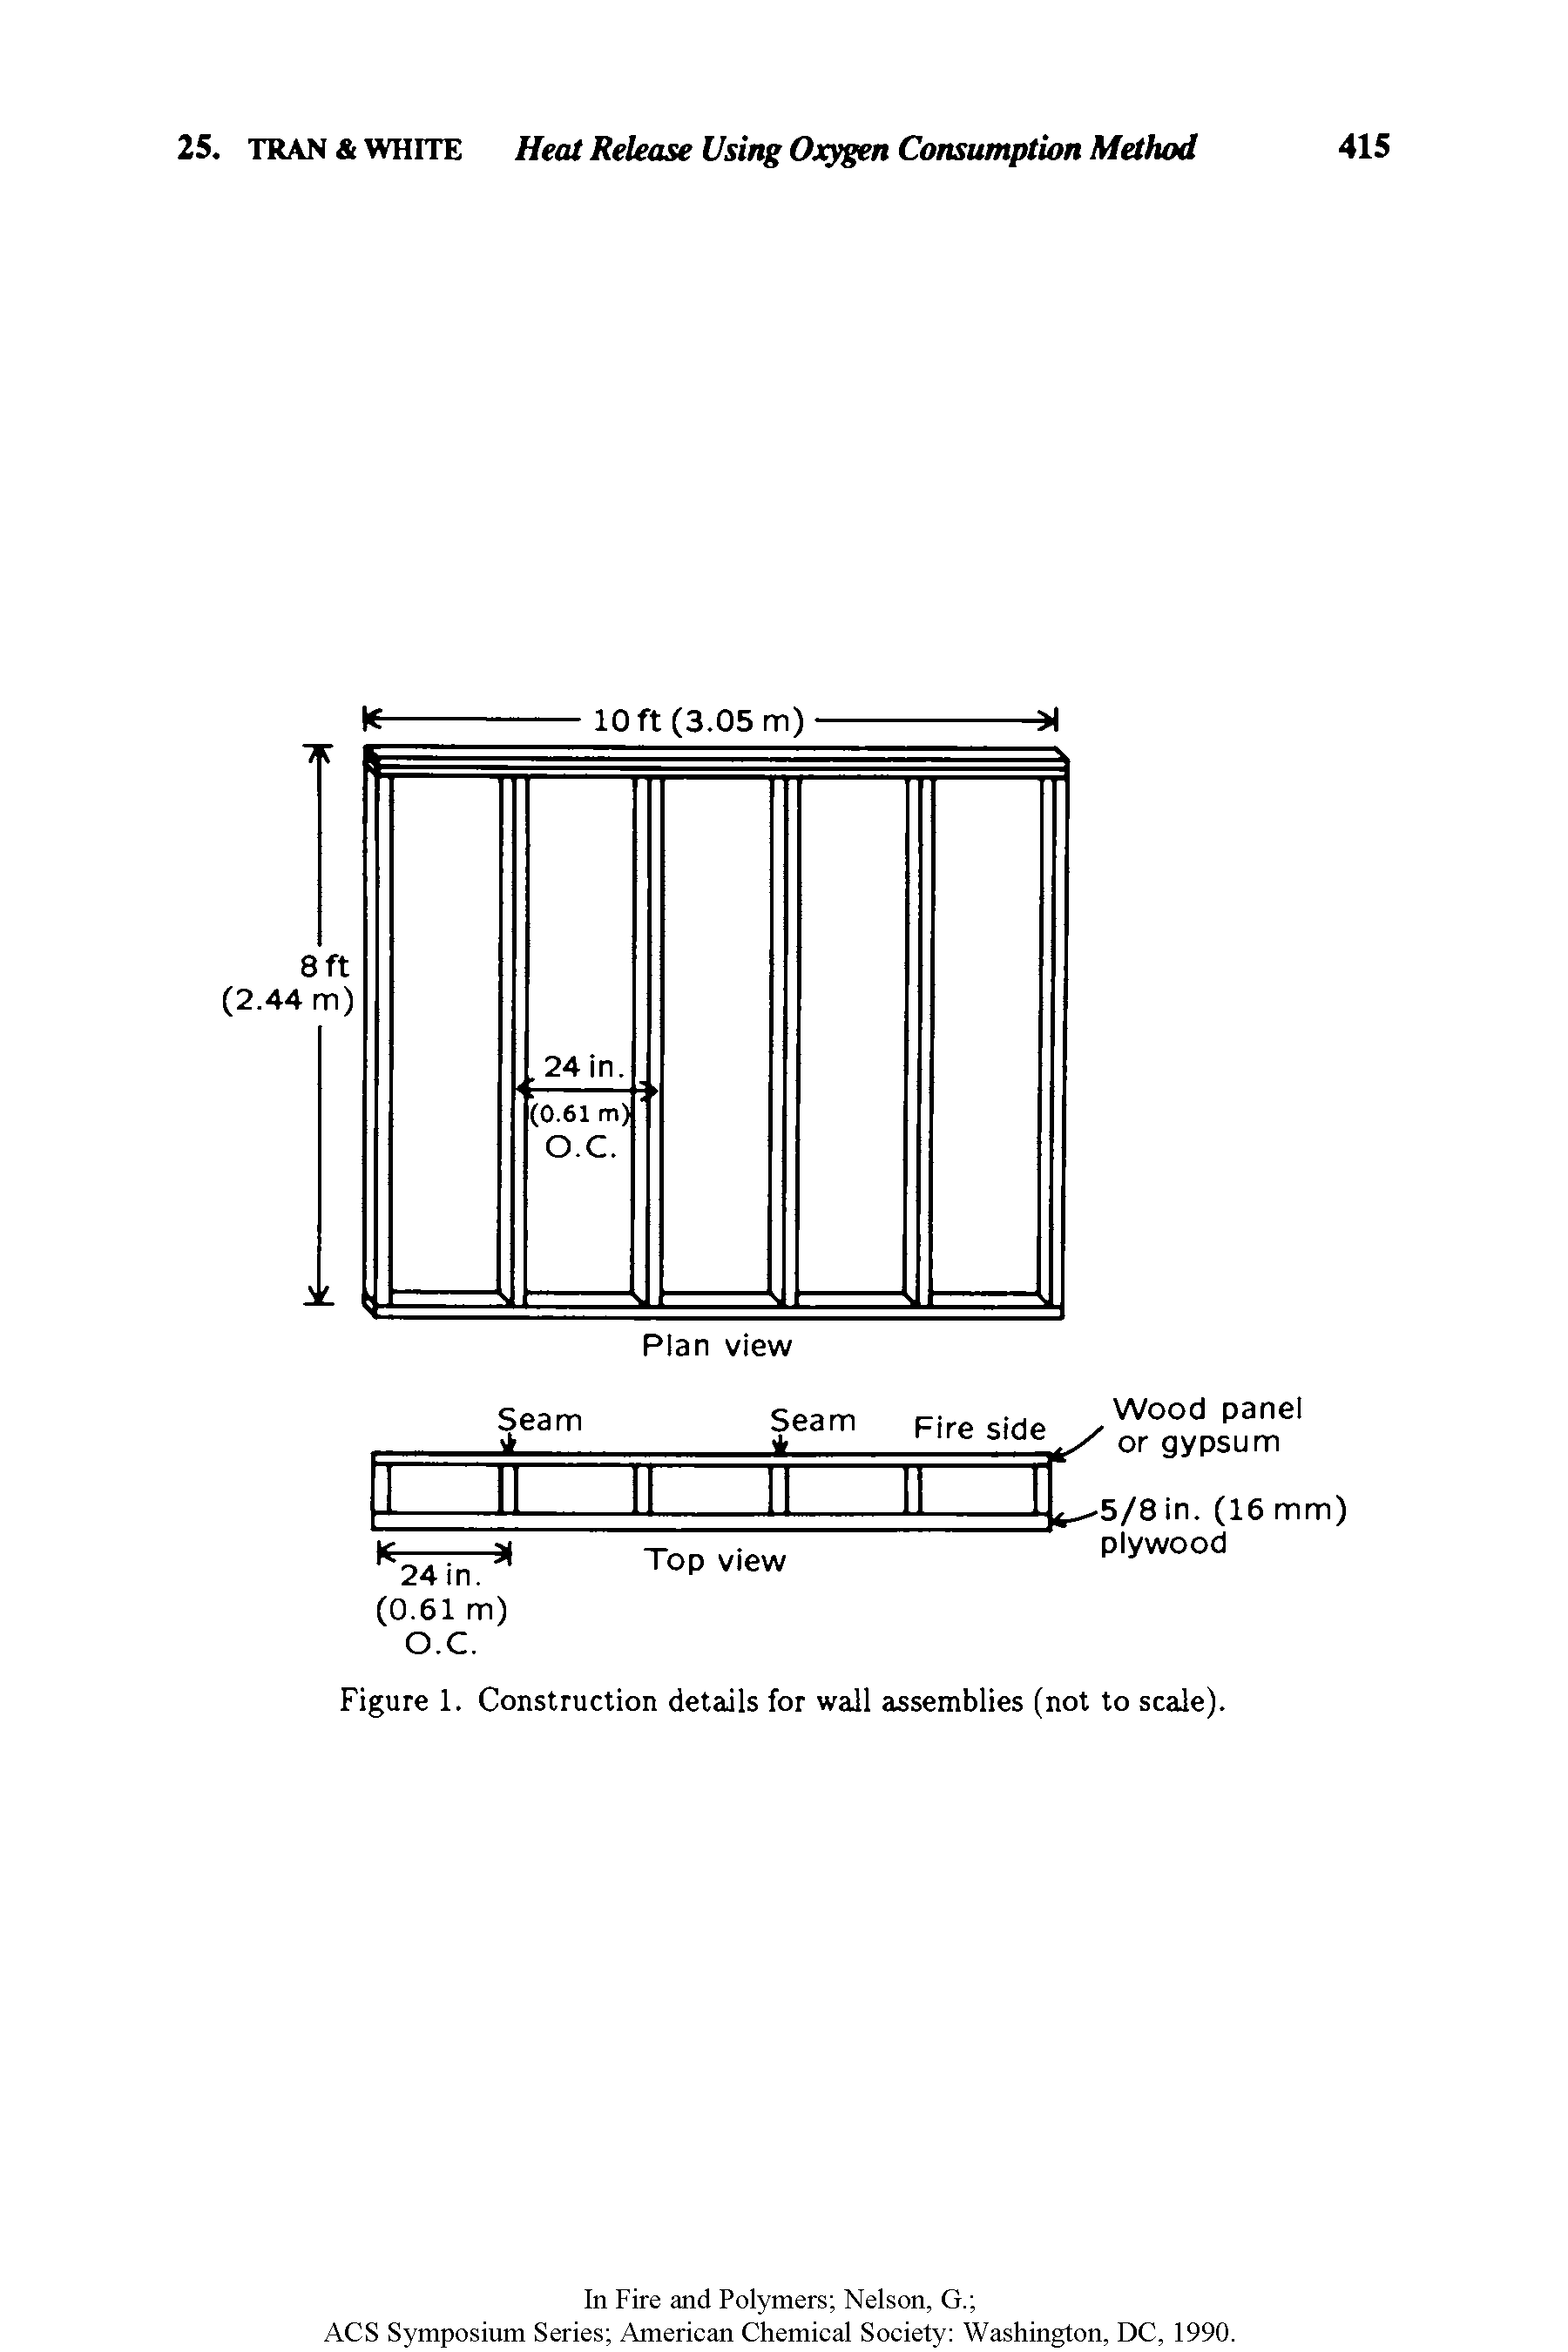 Figure 1. Construction details for wall assemblies (not to scale).